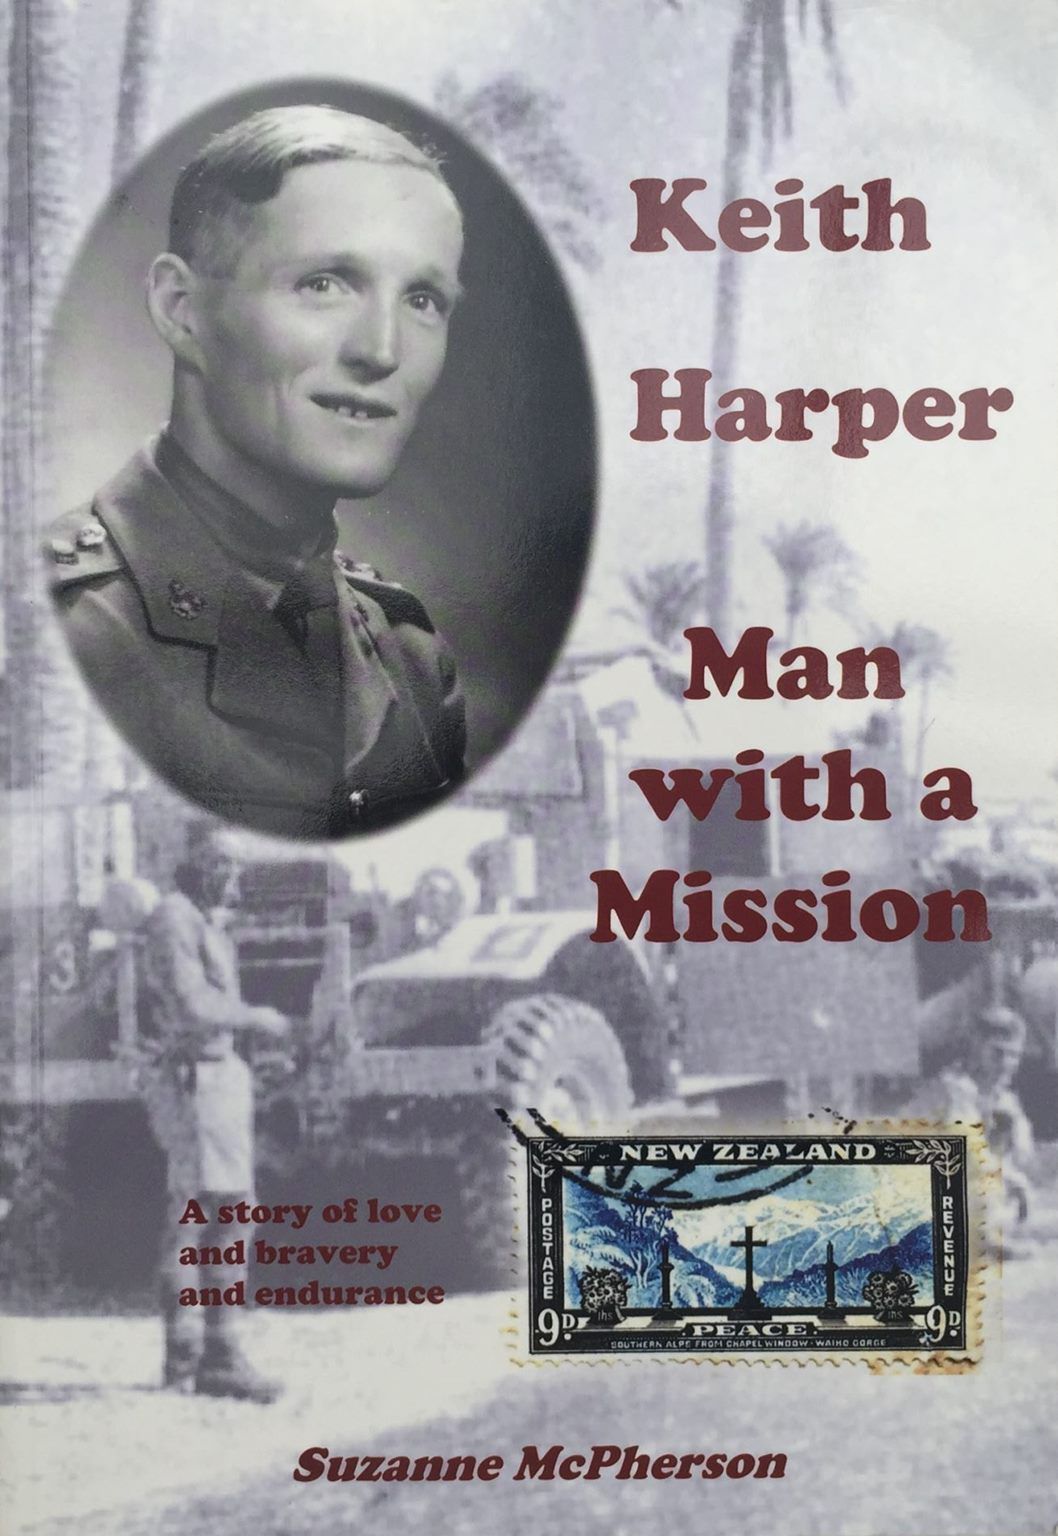 KEITH HARPER: Man with A Mission - A Story of Love and Bravery and Endurance